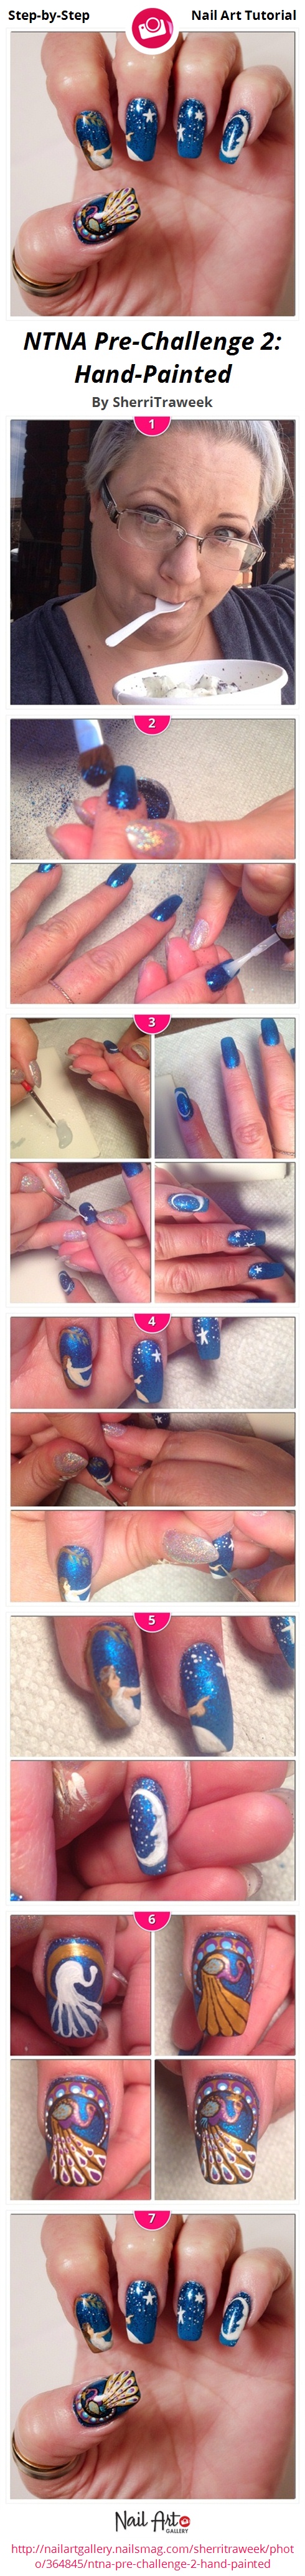 NTNA Pre-Challenge 2: Hand-Painted - Nail Art Gallery